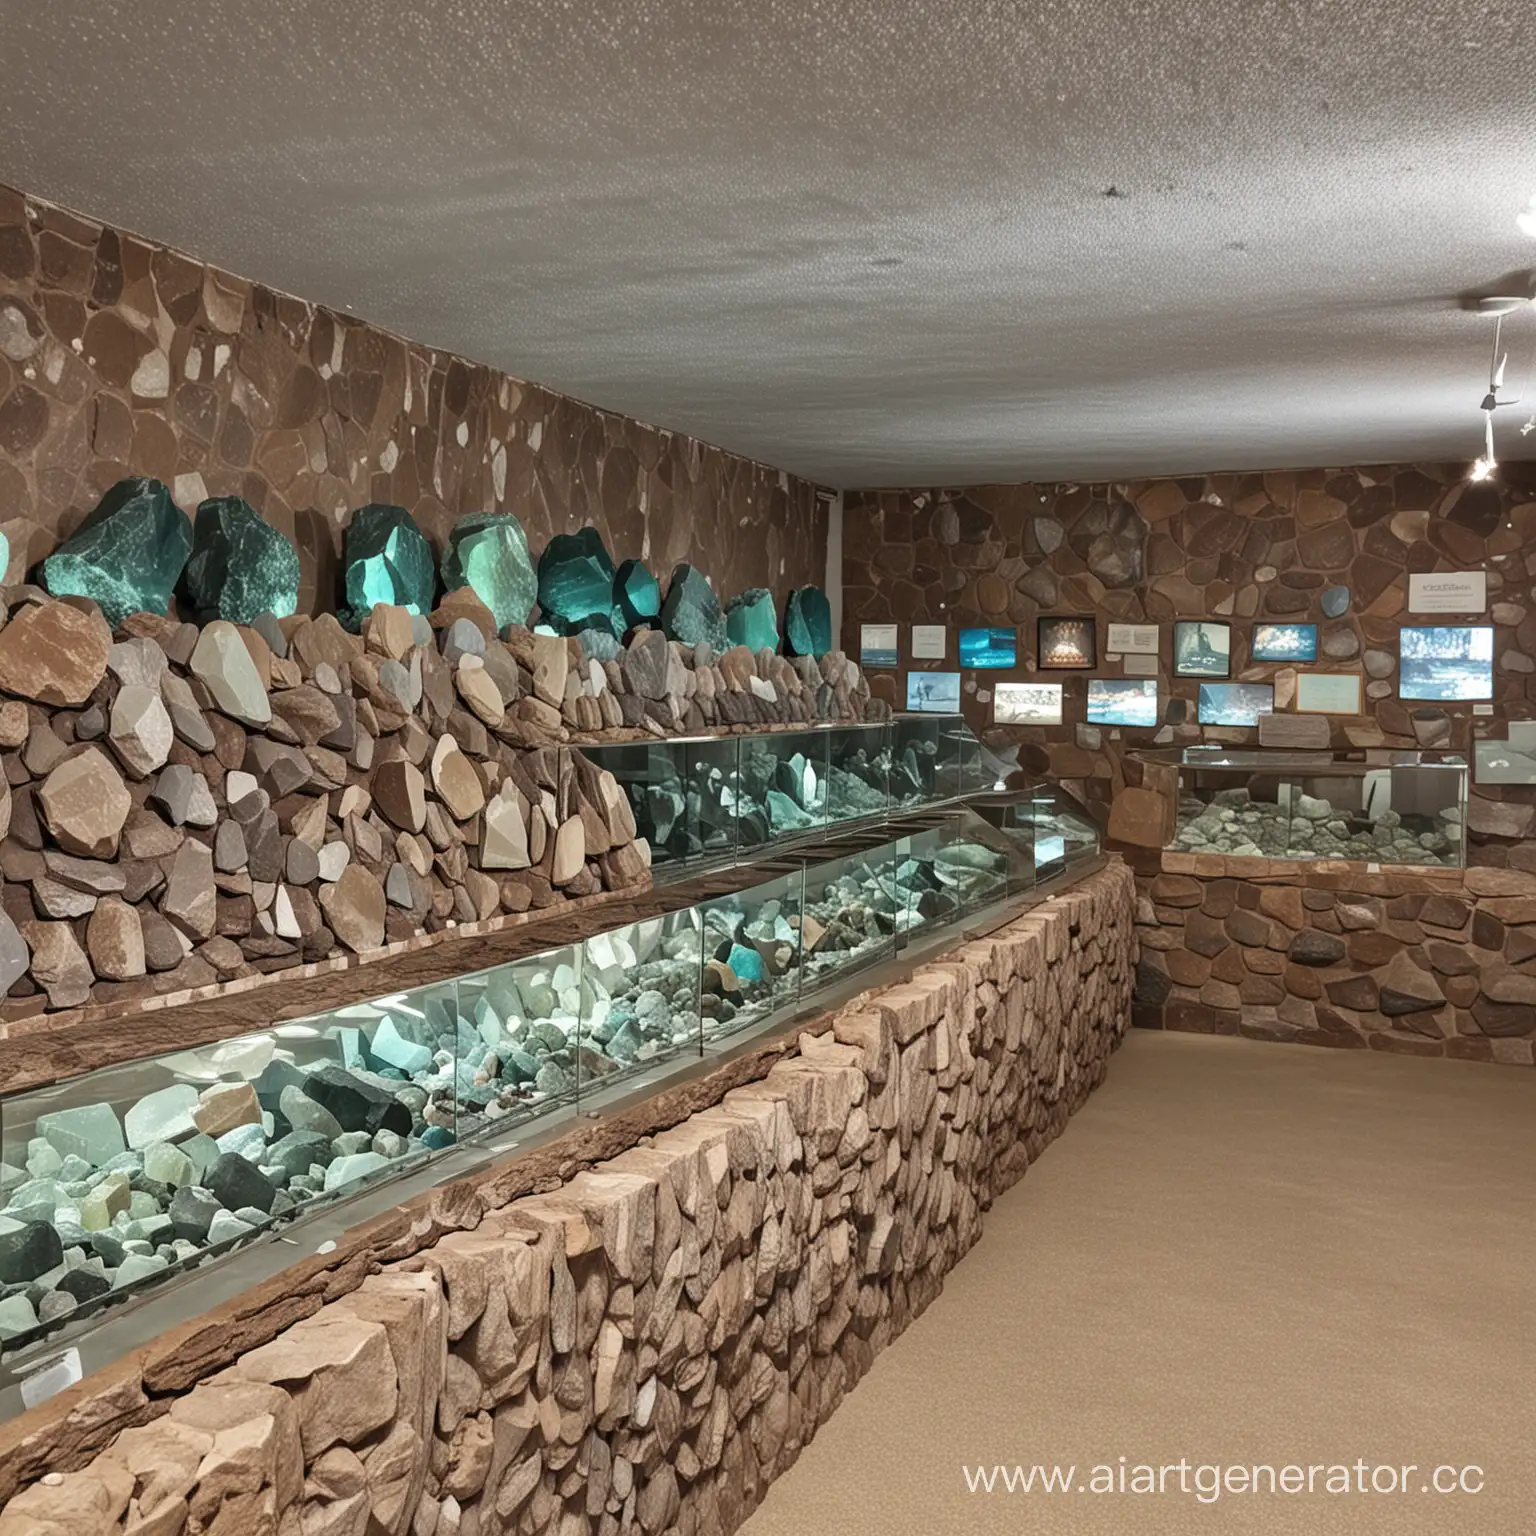 Exquisite-Mineral-Exhibits-in-a-Fascinating-Museum